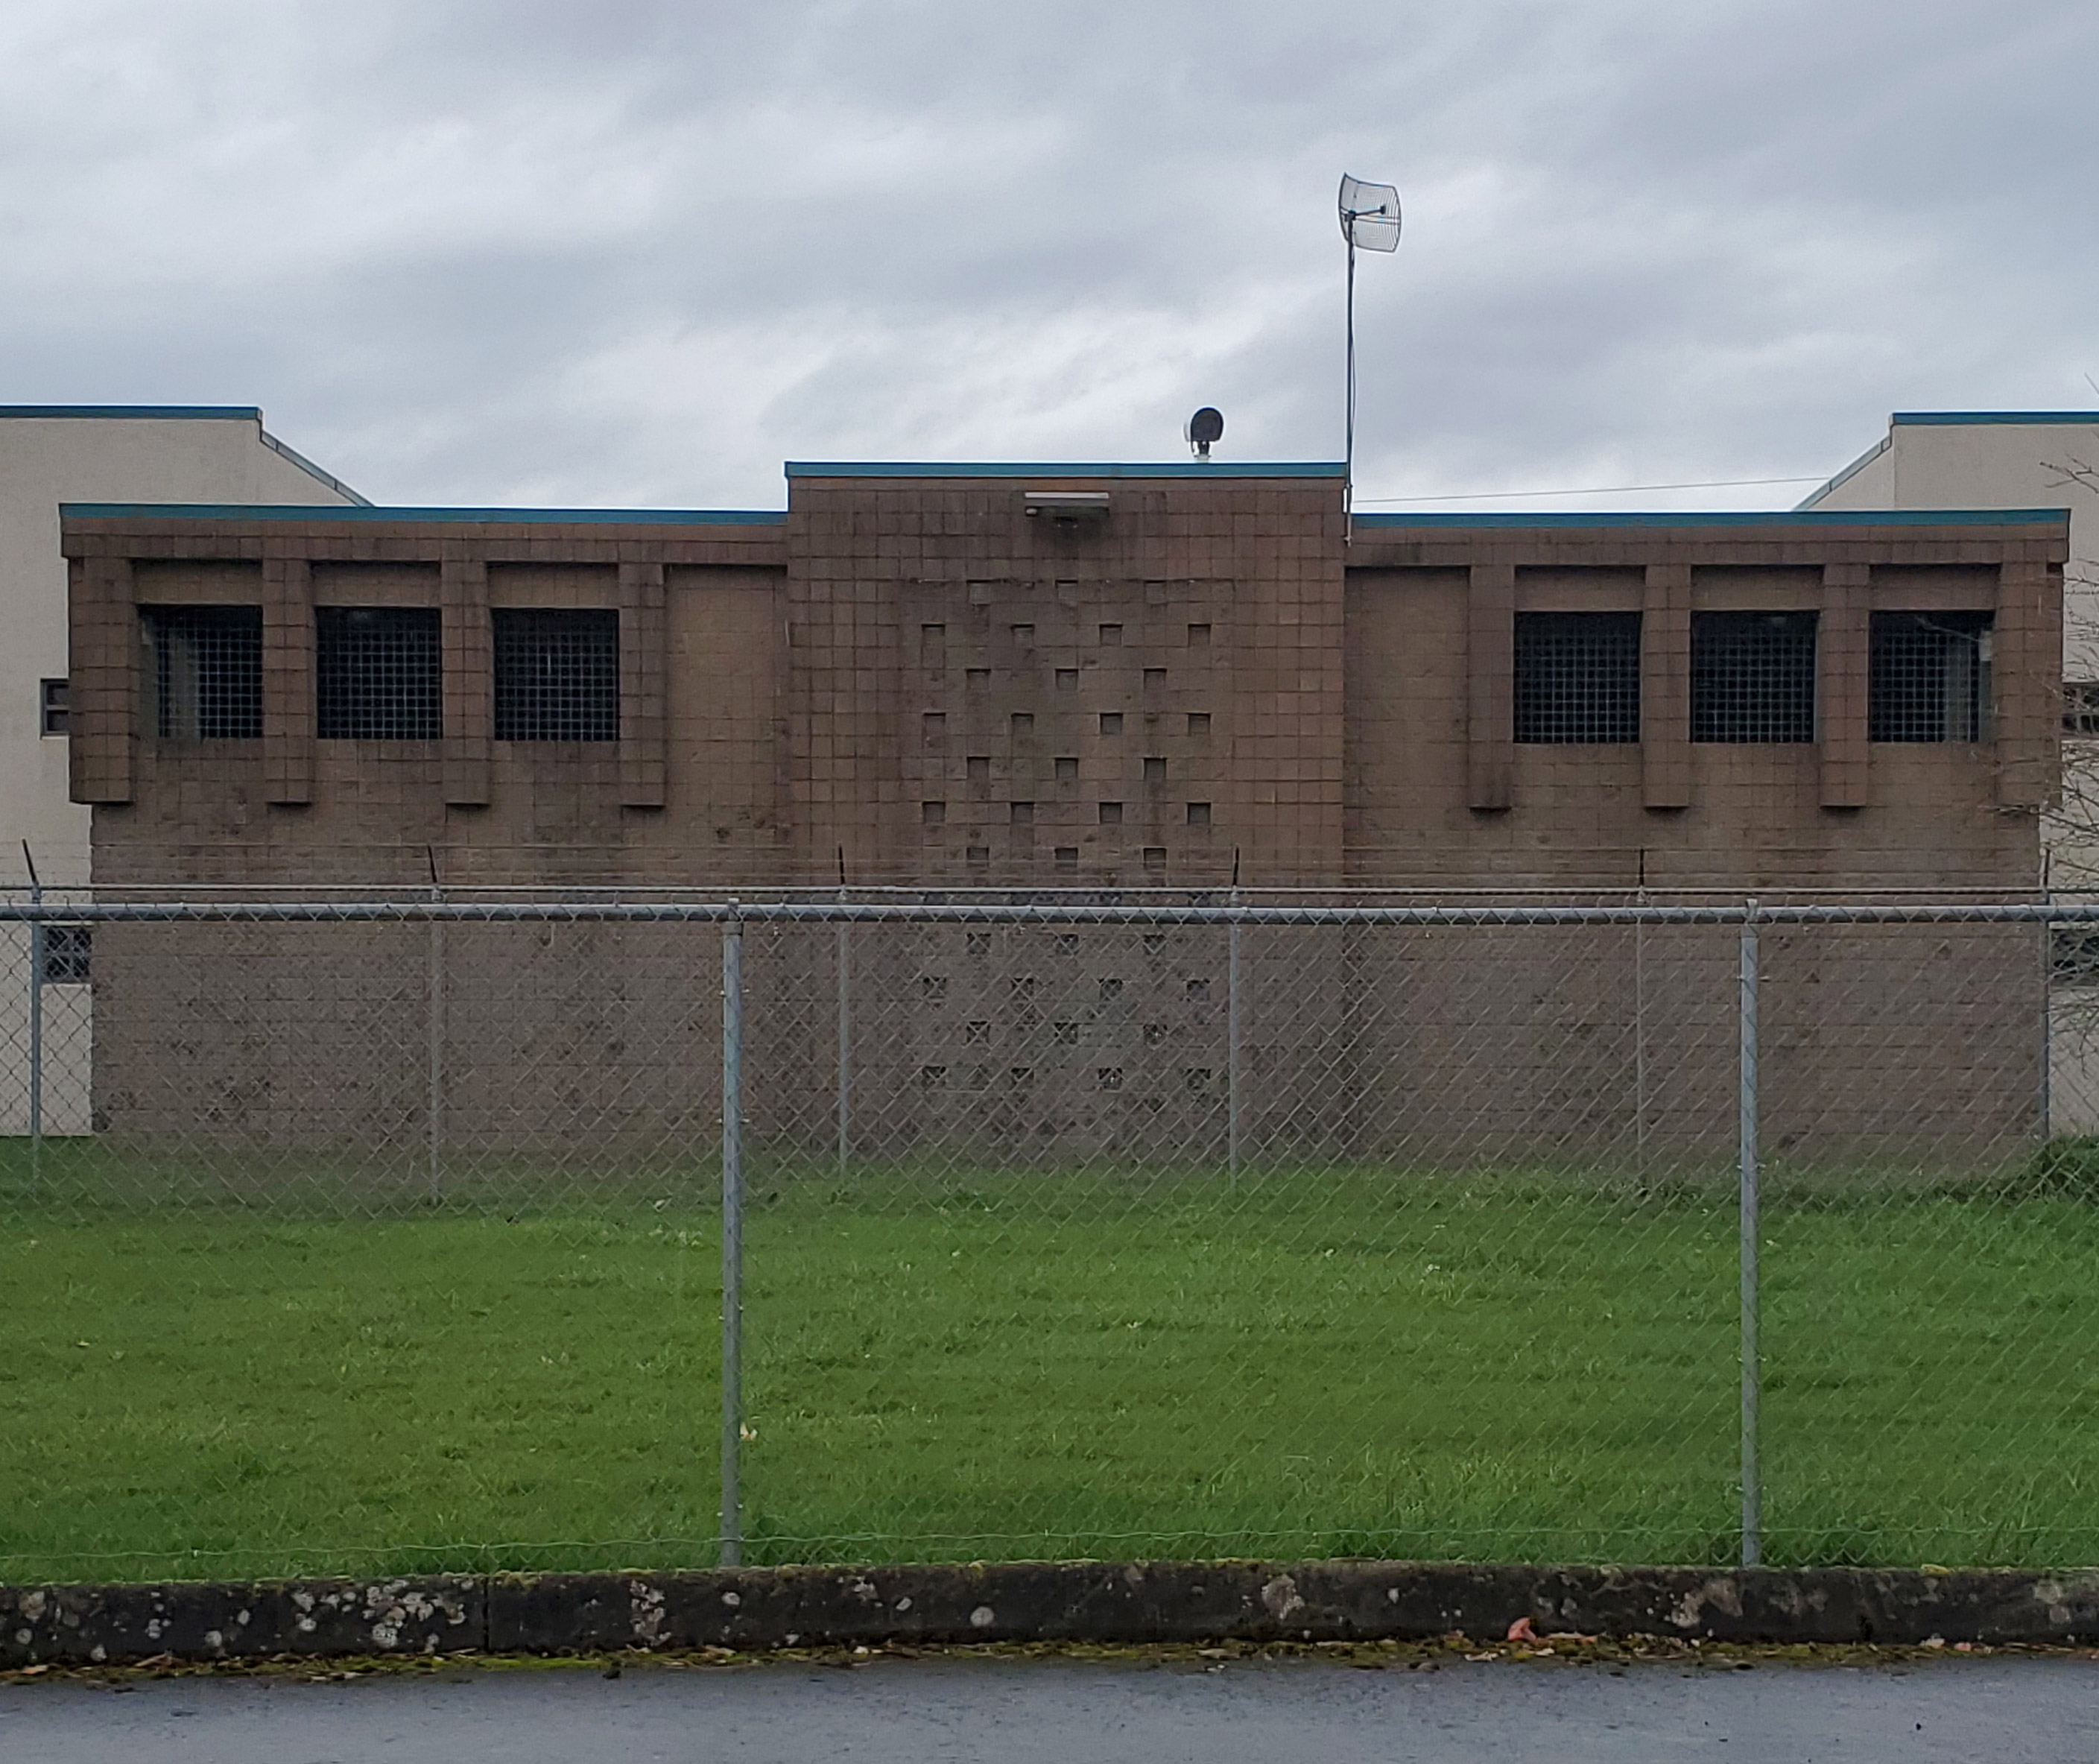 The "yard" at Cowlitz, which ICE has described as providing detained teenagers with outdoor recreation time.